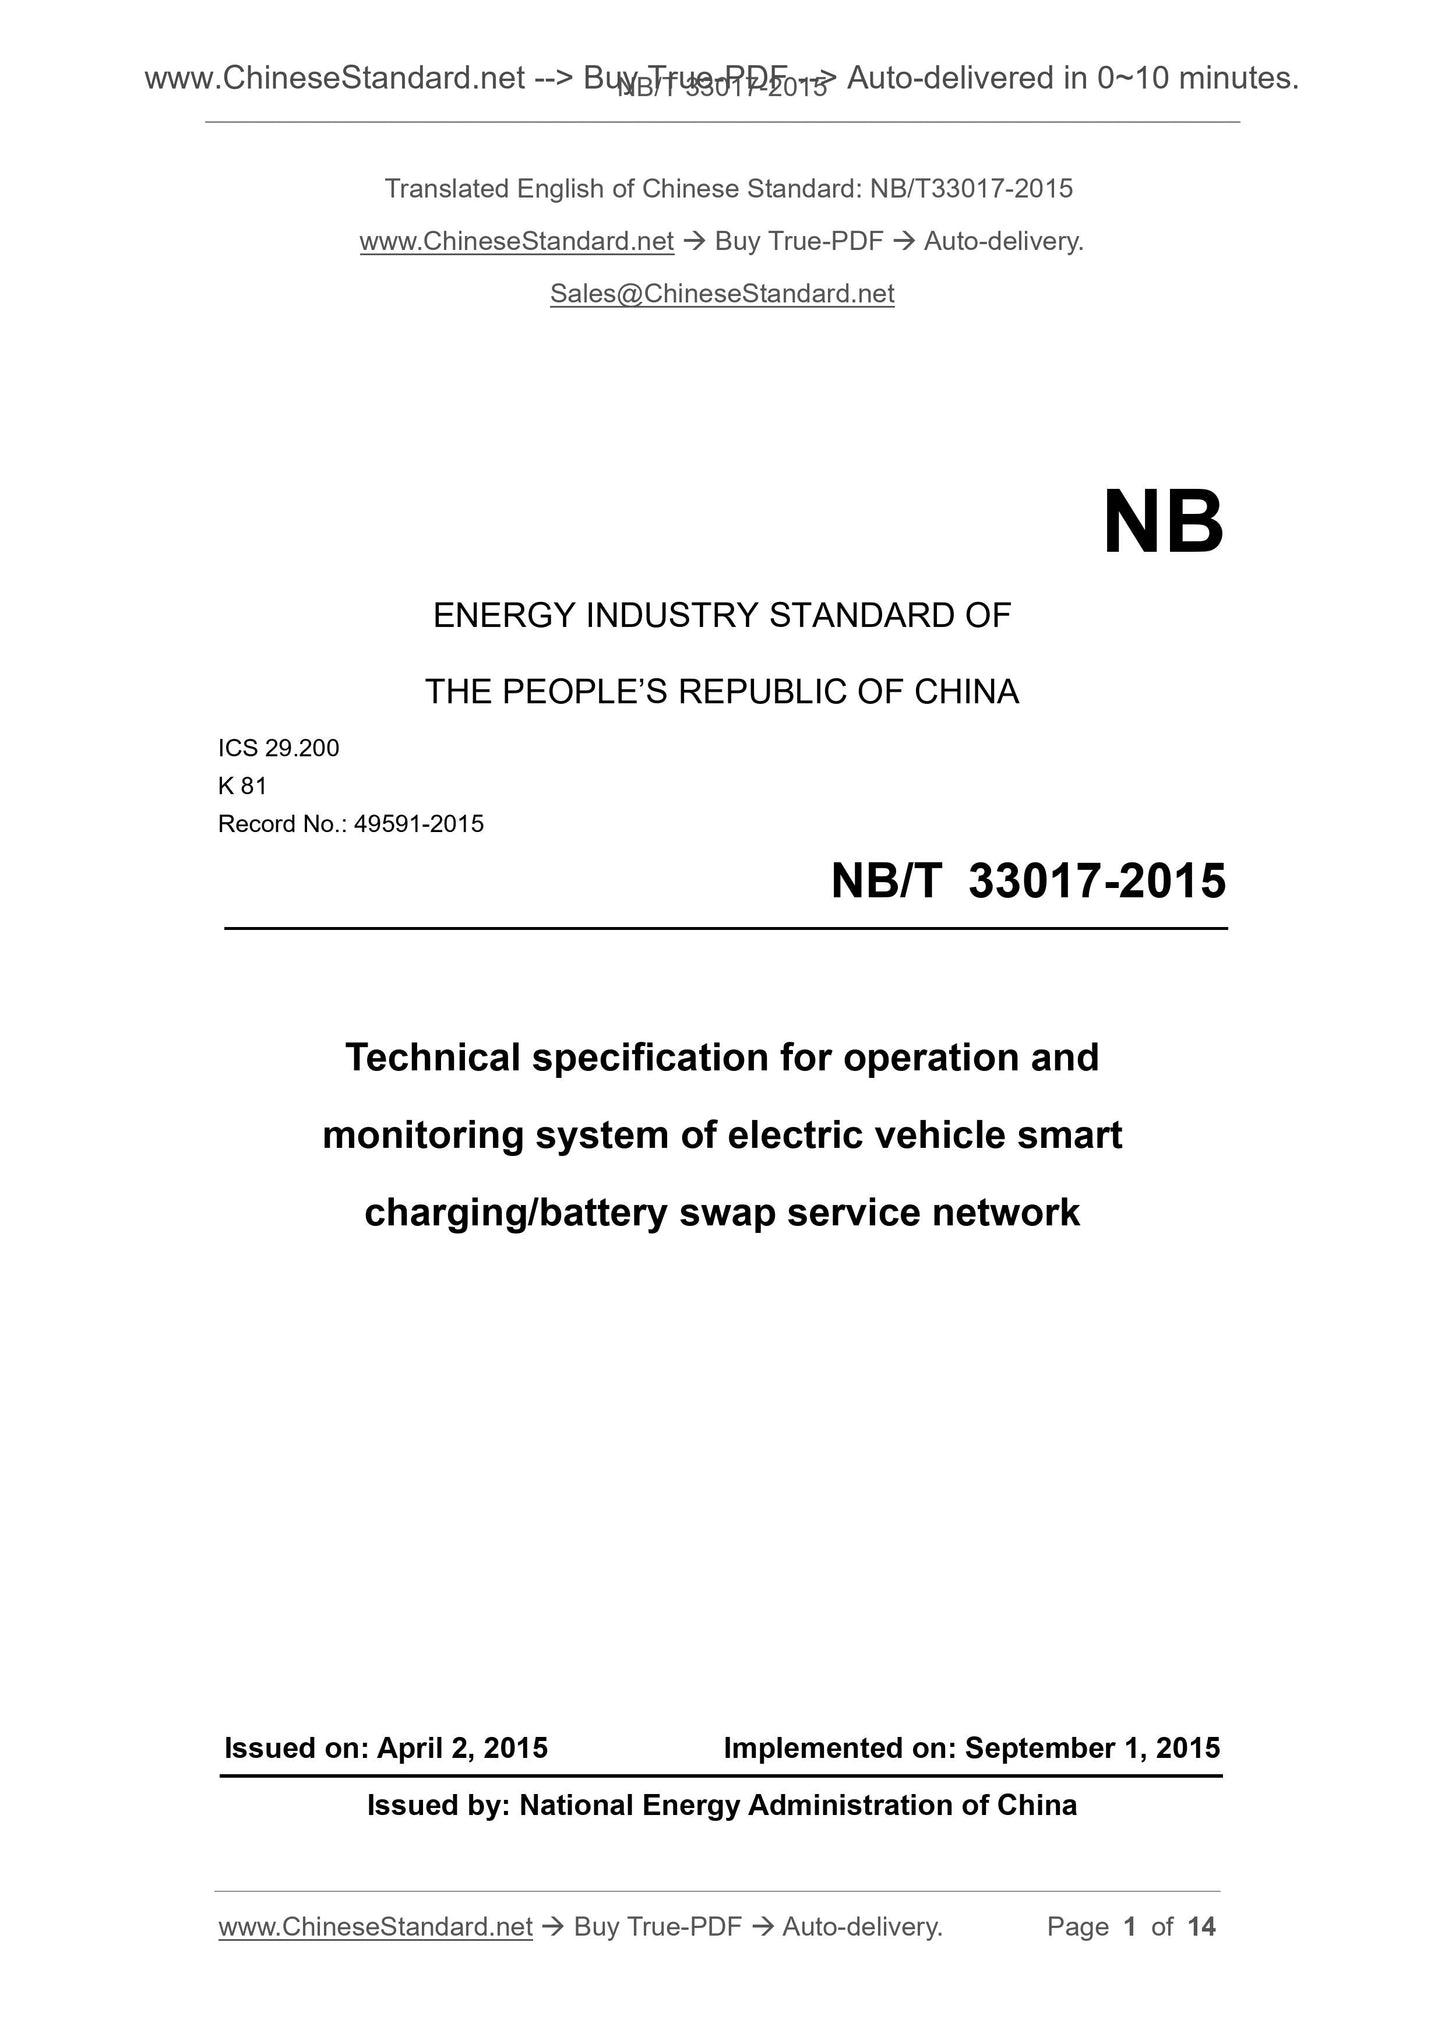 NB/T 33017-2015 Page 1